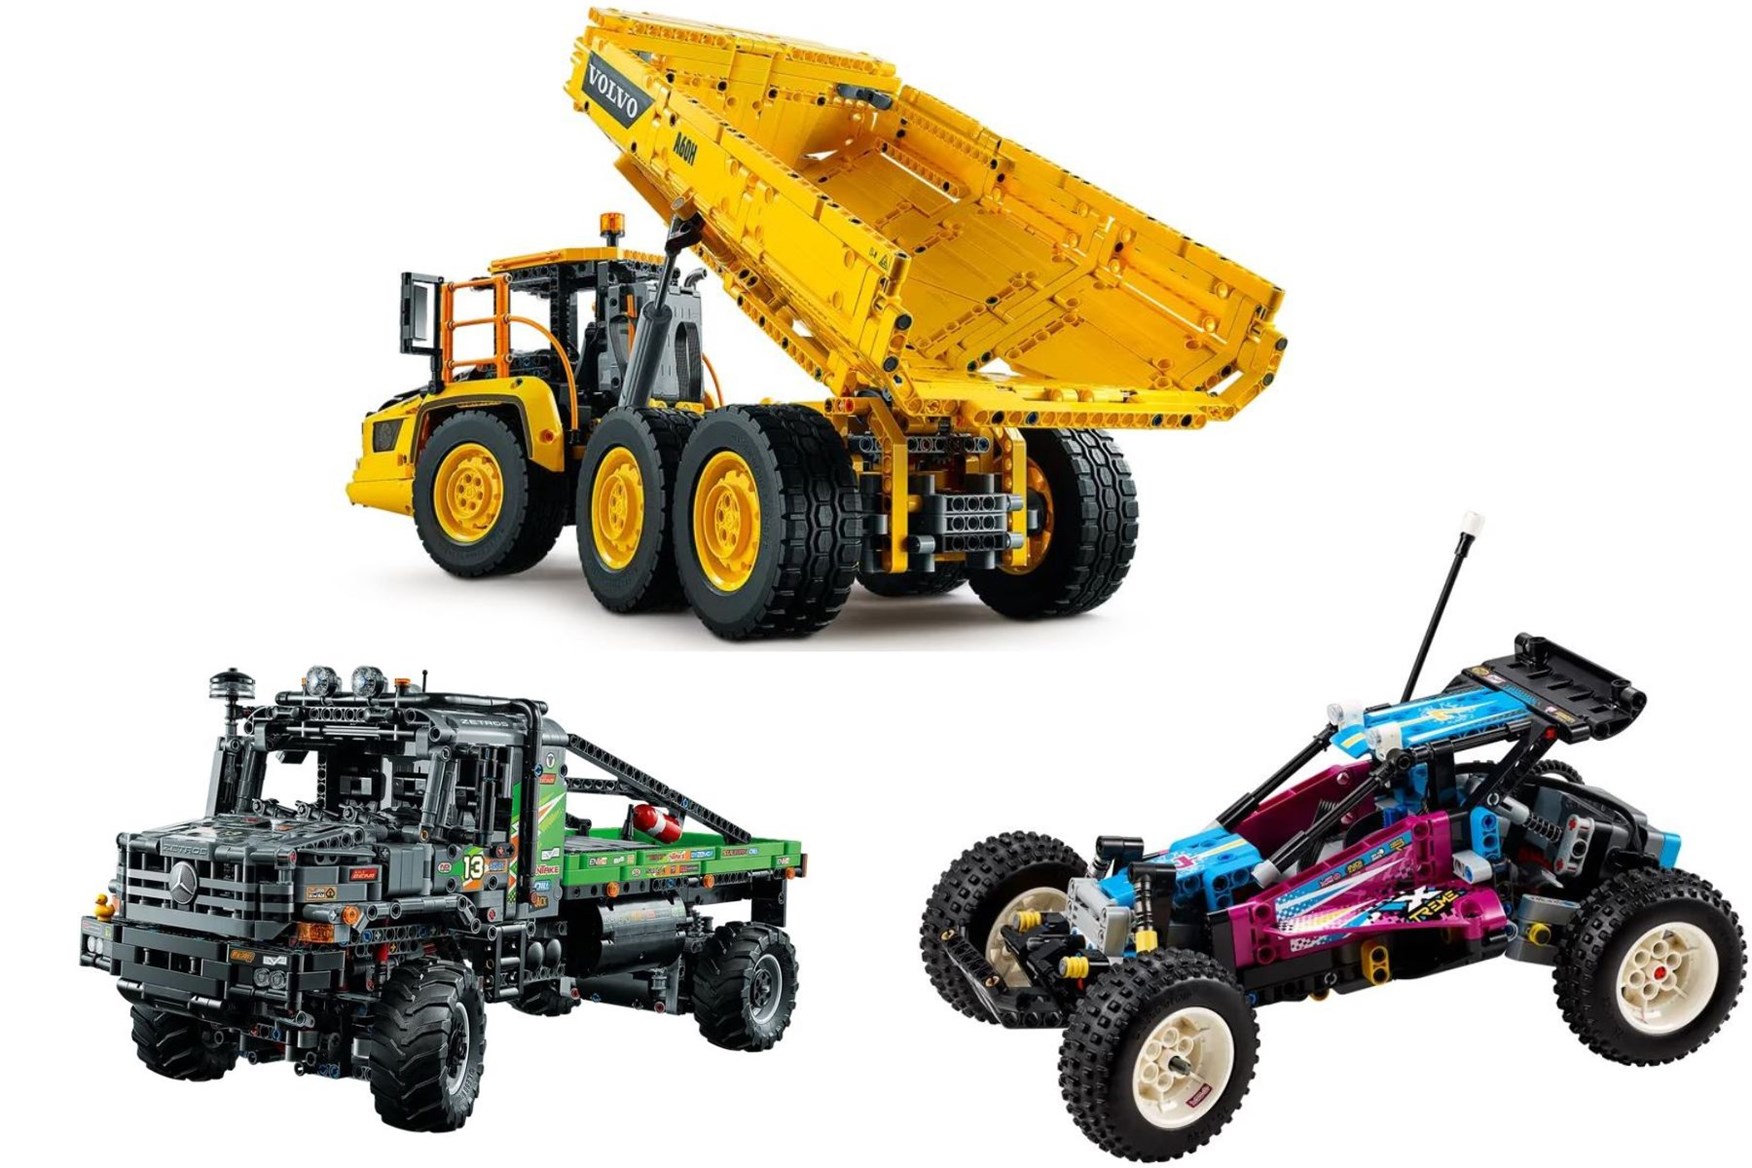 The best remote control LEGO vehicles Parkers